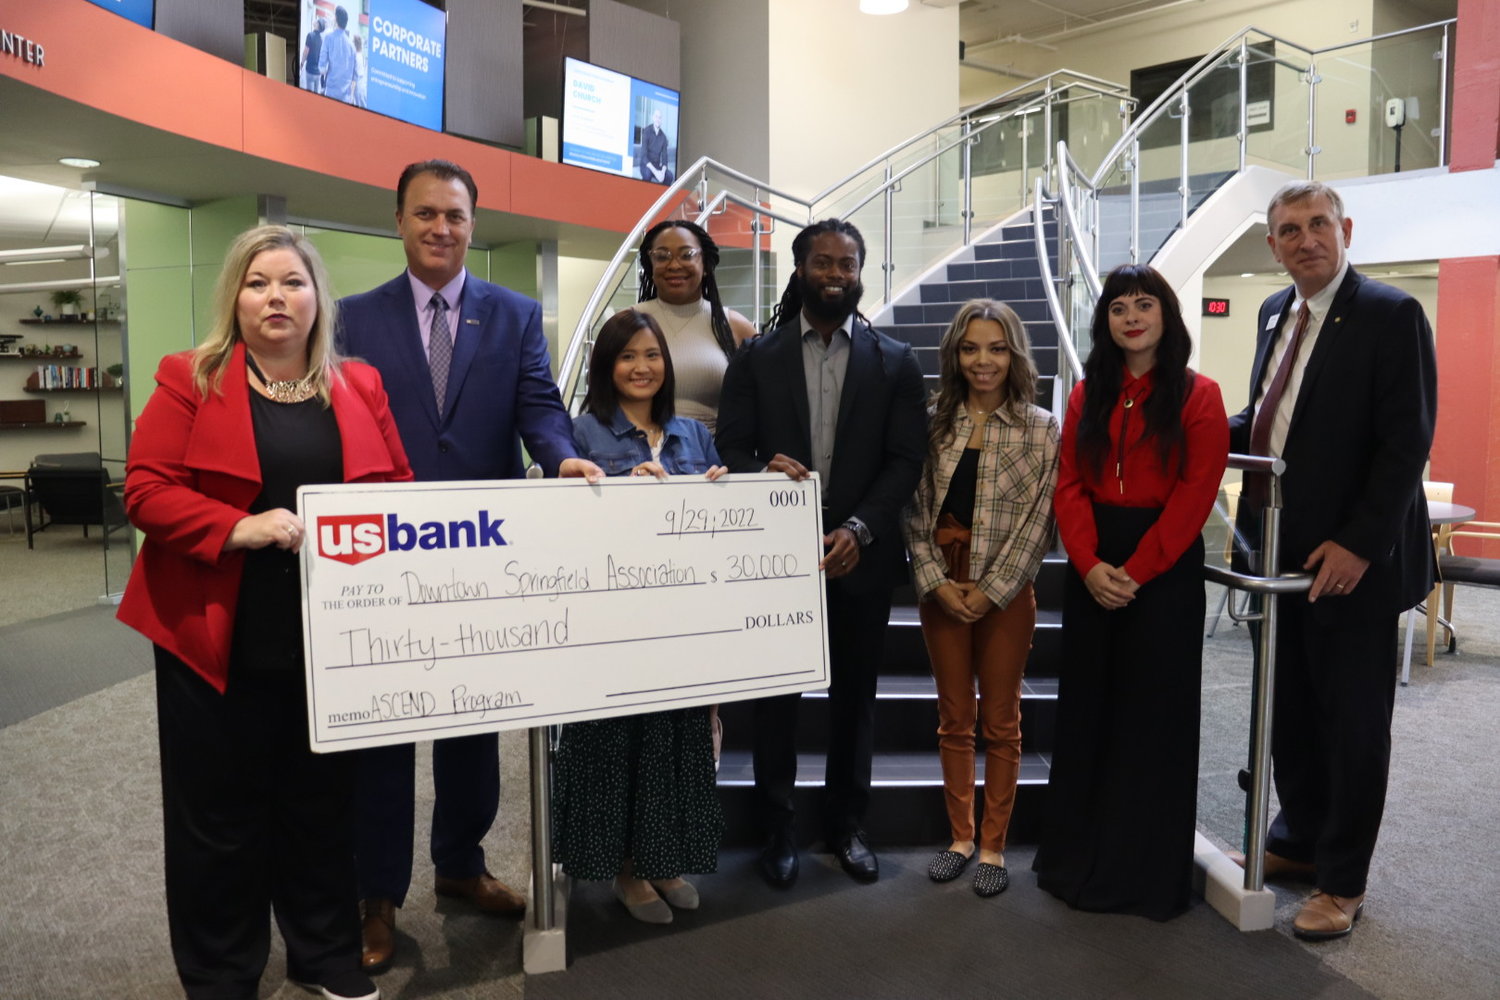 The U.S. Bank Foundation awards $30,000 to the Downtown Springfield Association to issue grants to minority-owned businesses.